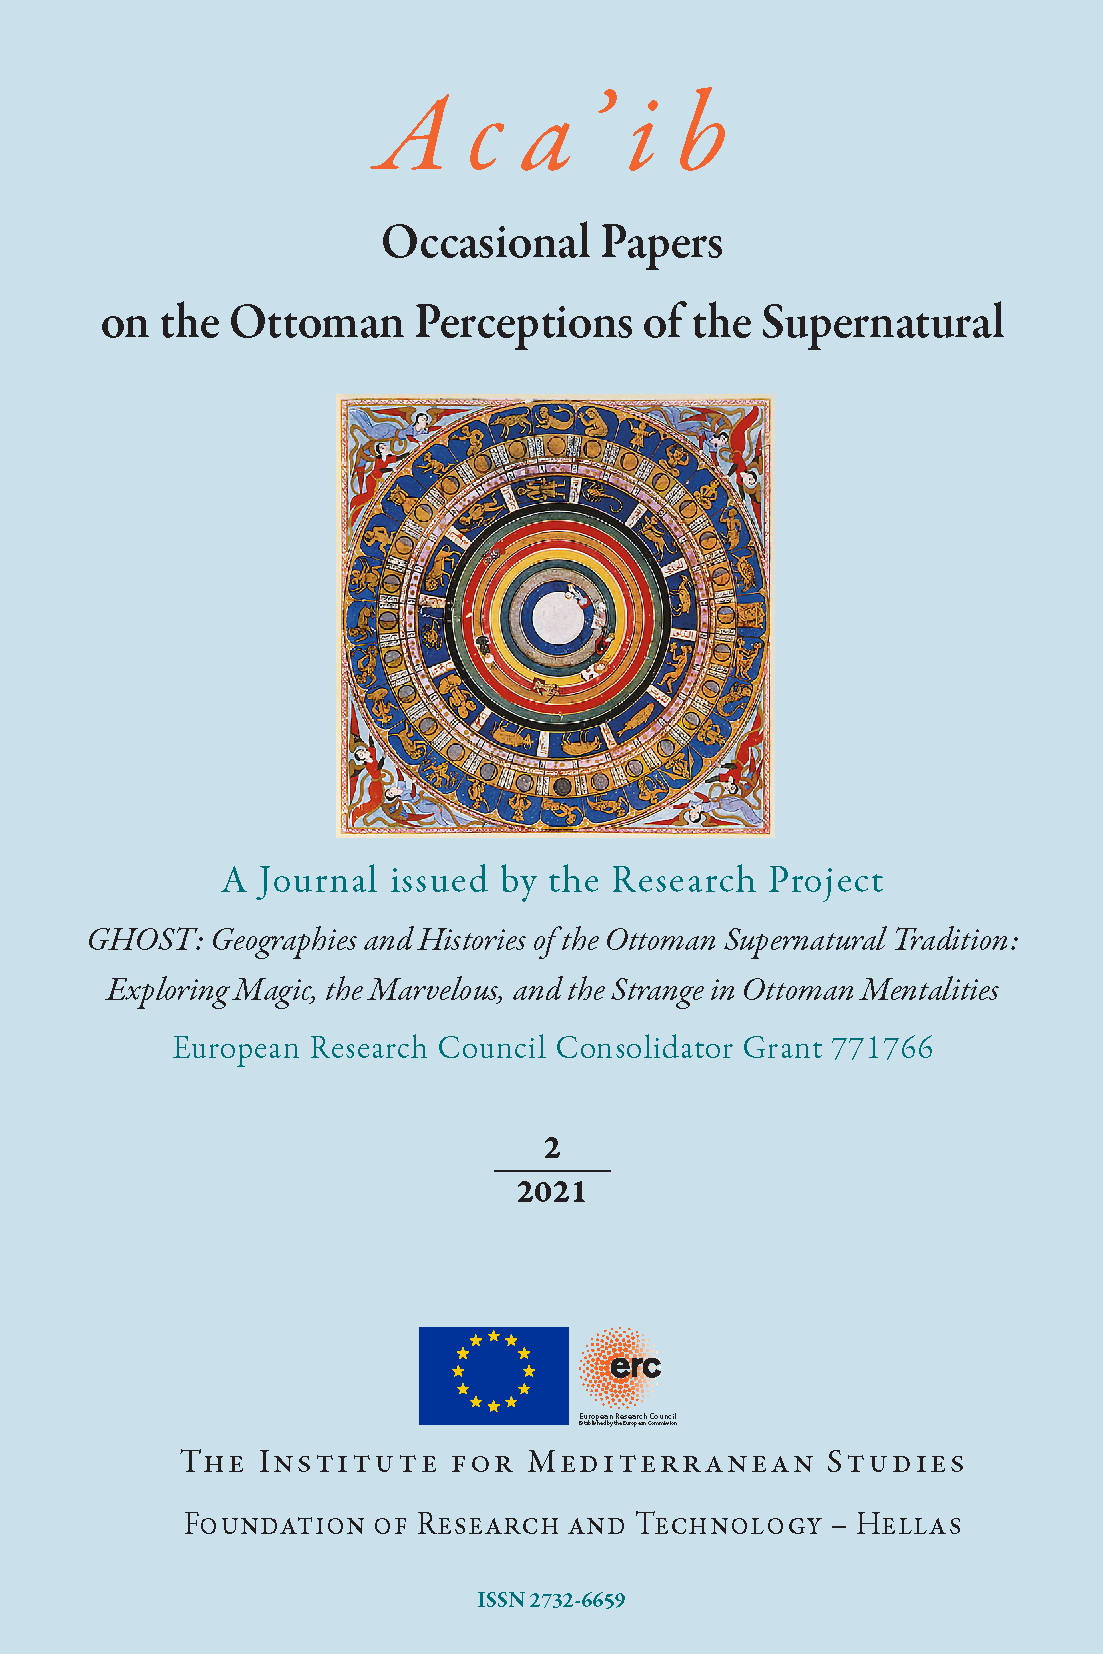 Read more about the article The second issue of our GHOST online, open-access journal “Aca’ib: Occasional papers on the Ottoman perceptions of the supernatural” has been launched!